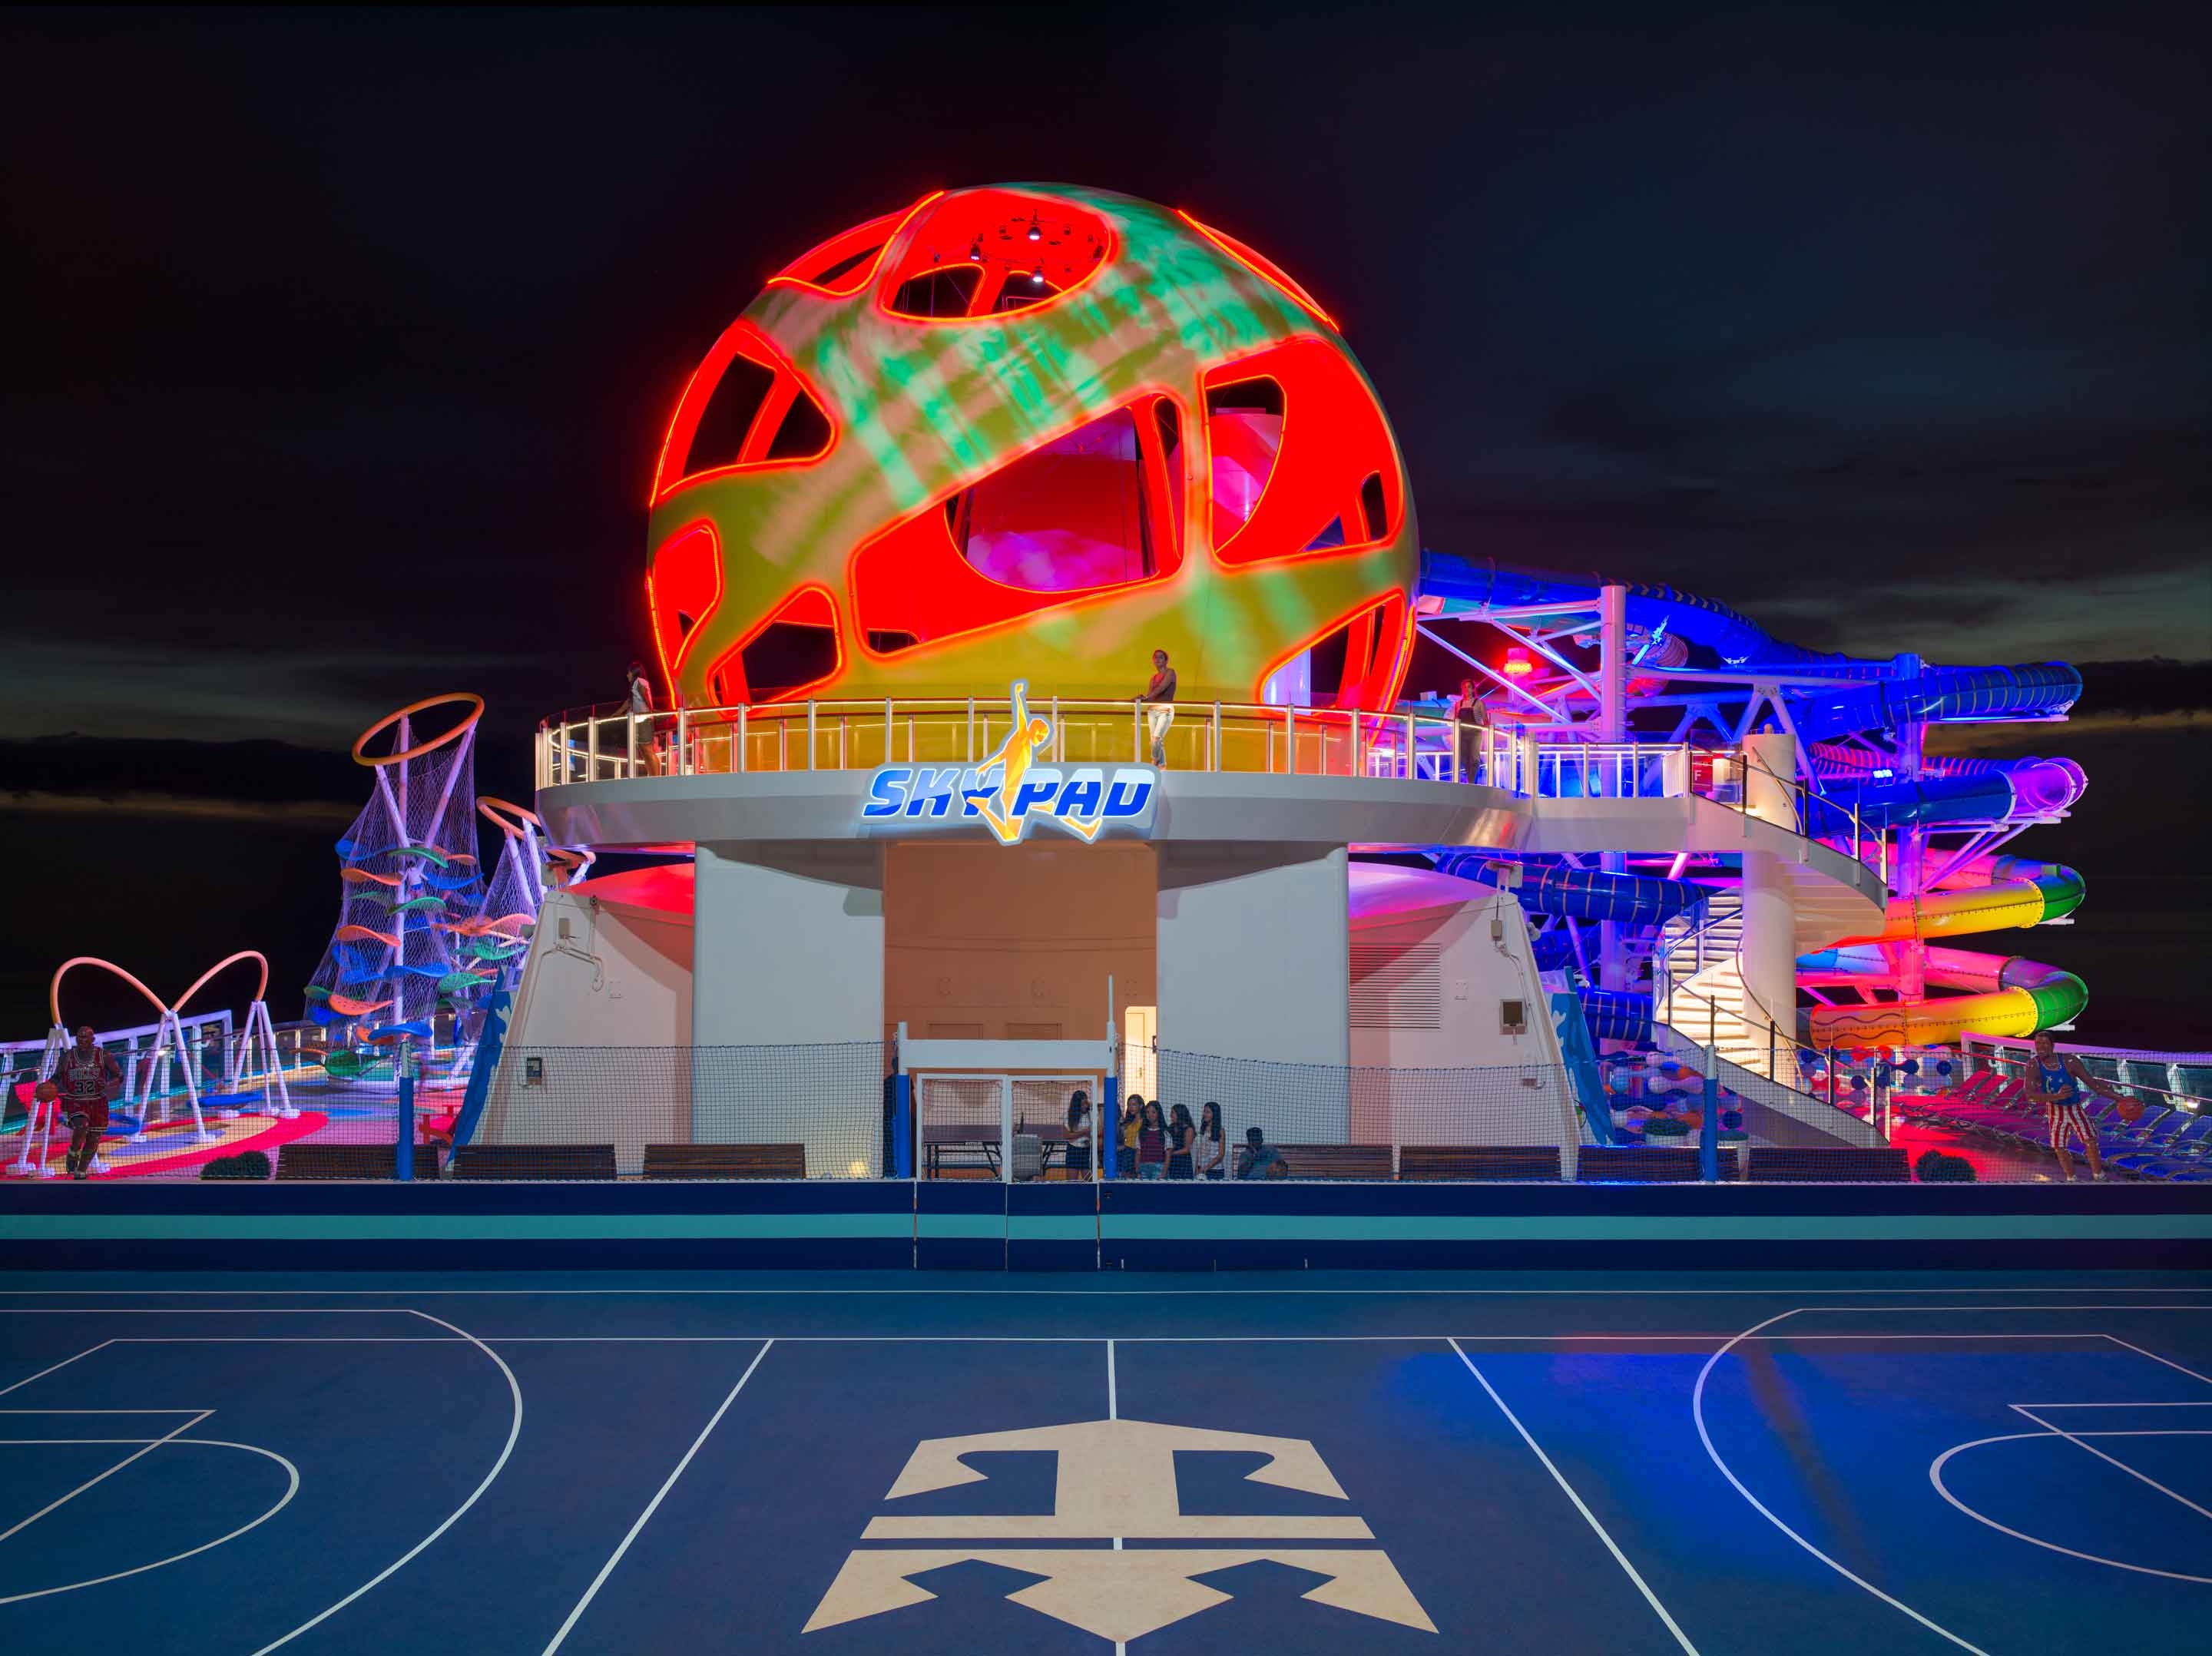 View of Skypad, Court and Slides at night